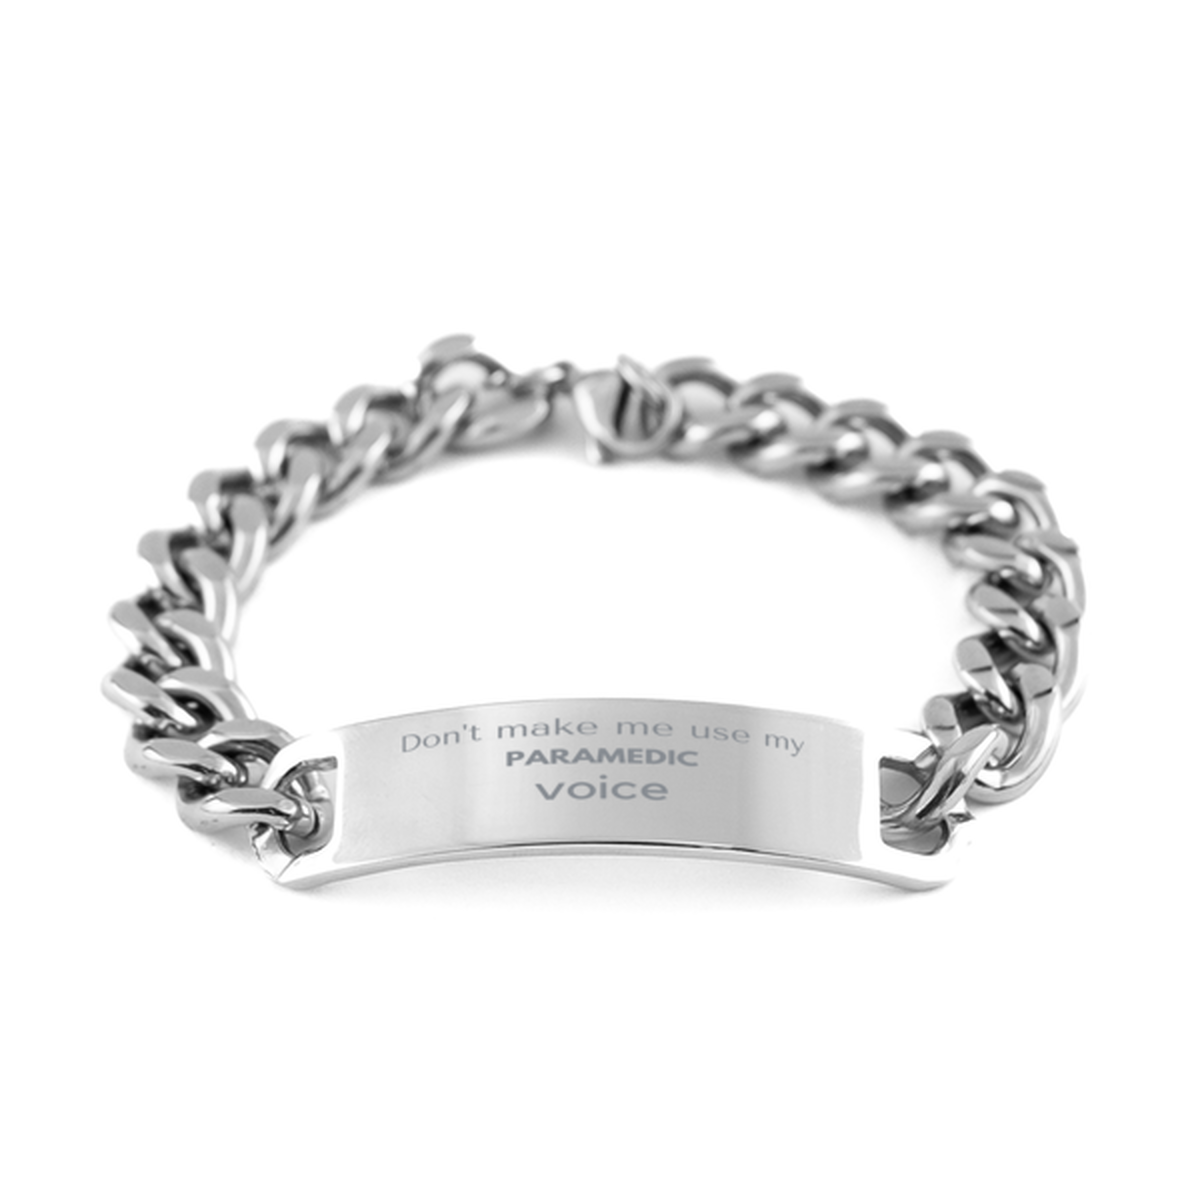 Don't make me use my Paramedic voice, Sarcasm Paramedic Gifts, Christmas Paramedic Cuban Chain Stainless Steel Bracelet Birthday Unique Gifts For Paramedic Coworkers, Men, Women, Colleague, Friends